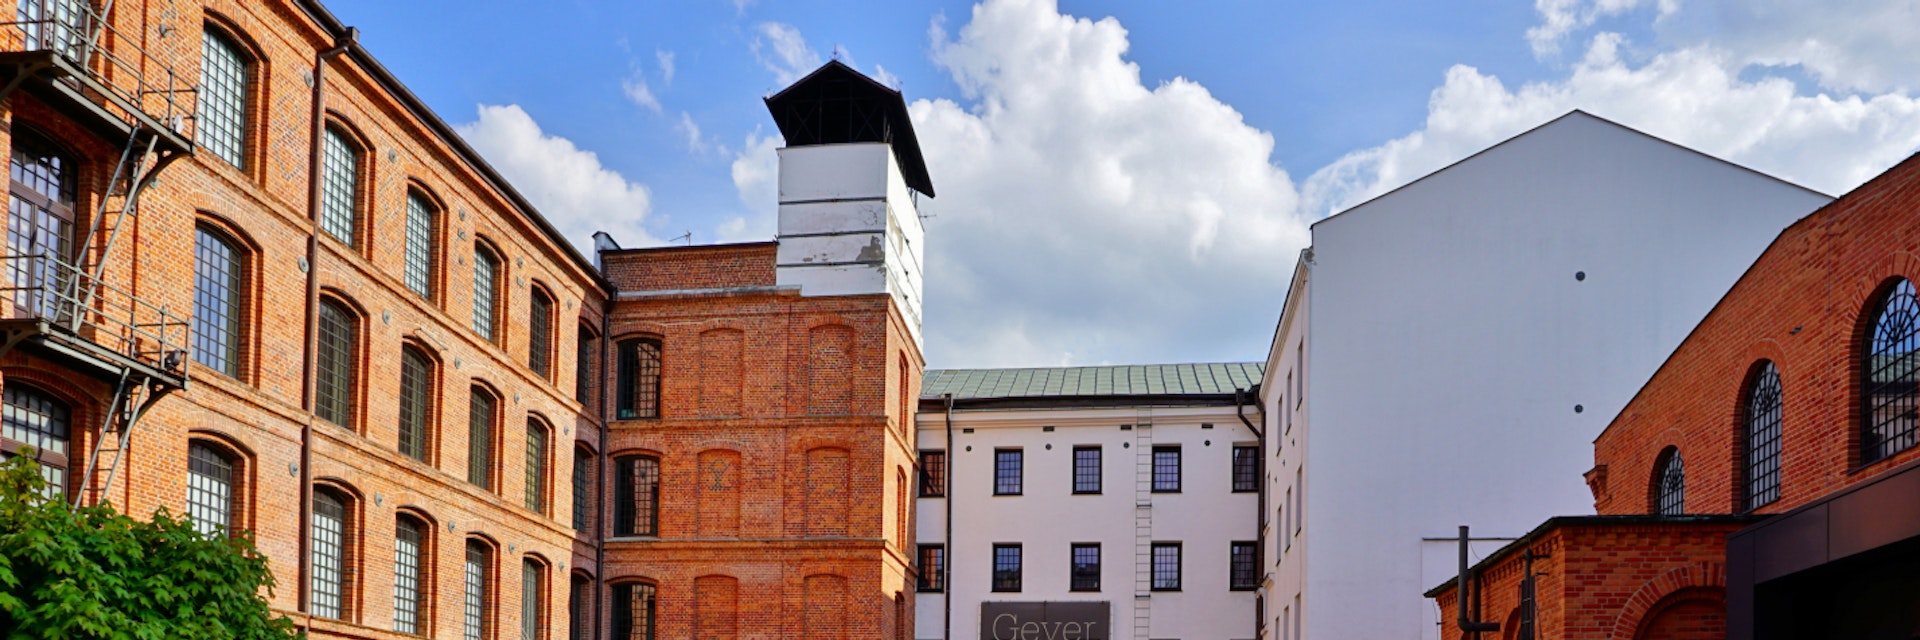 LODZ,POLAND, CENTRAL MUSEUM OF TEXTILES , APRIL, 27, 2018:The White Factory presently the seat of the Central Museum of Textiles, Lodz, Poland; Shutterstock ID 1085771489; Your name (First / Last): Gemma Graham; GL account no.: 65050; Netsuite department name: Online Editorial; Full Product or Project name including edition: Lodz destination page